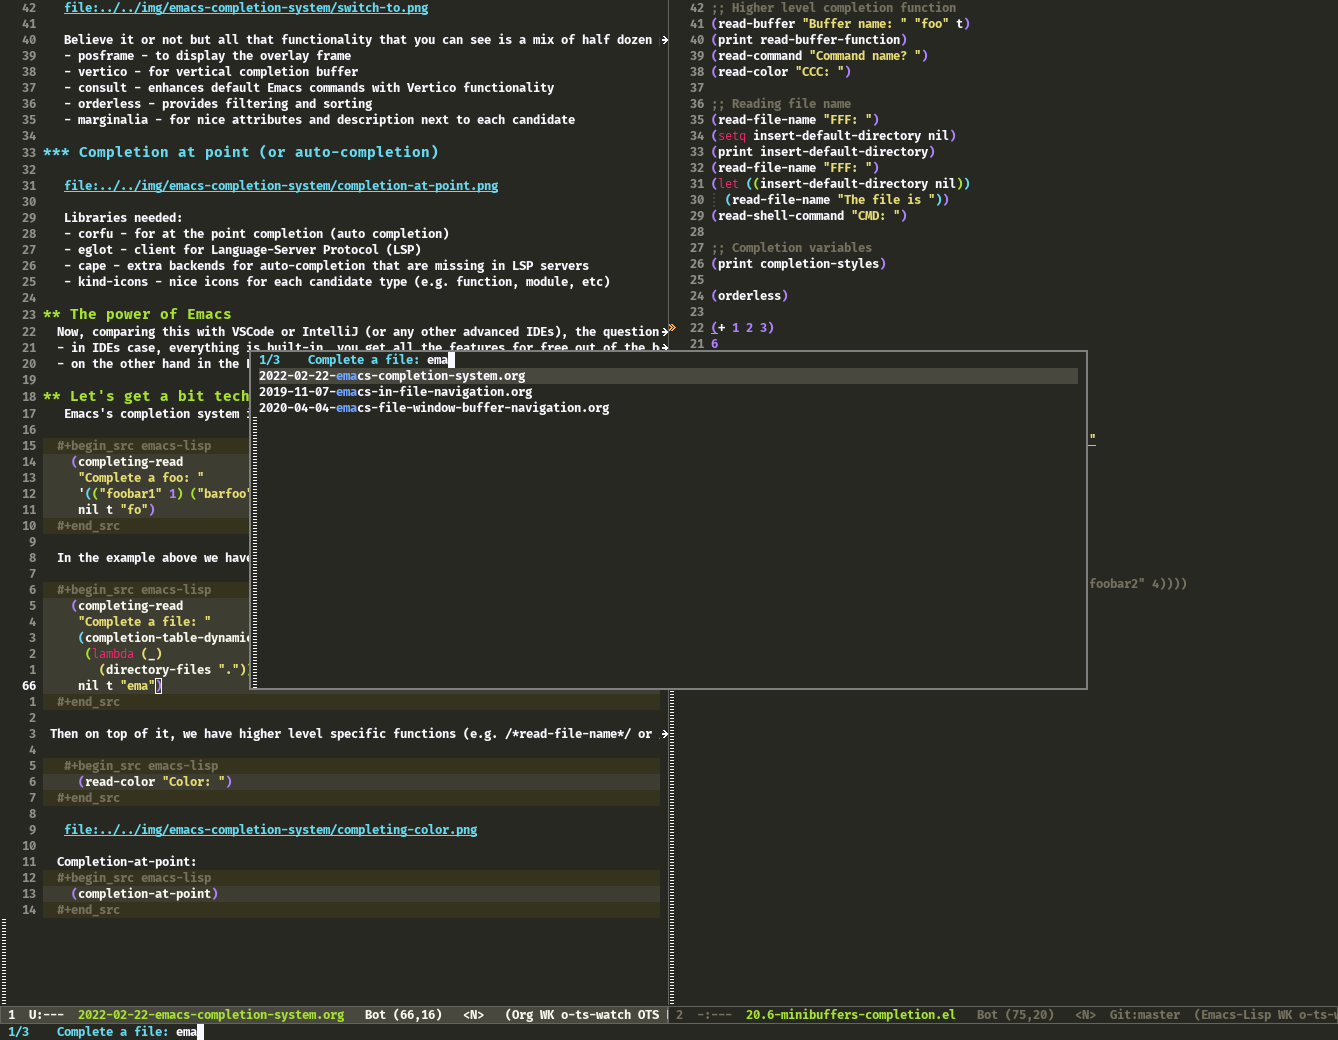 ../../img/emacs-completion-system/completing-file.png